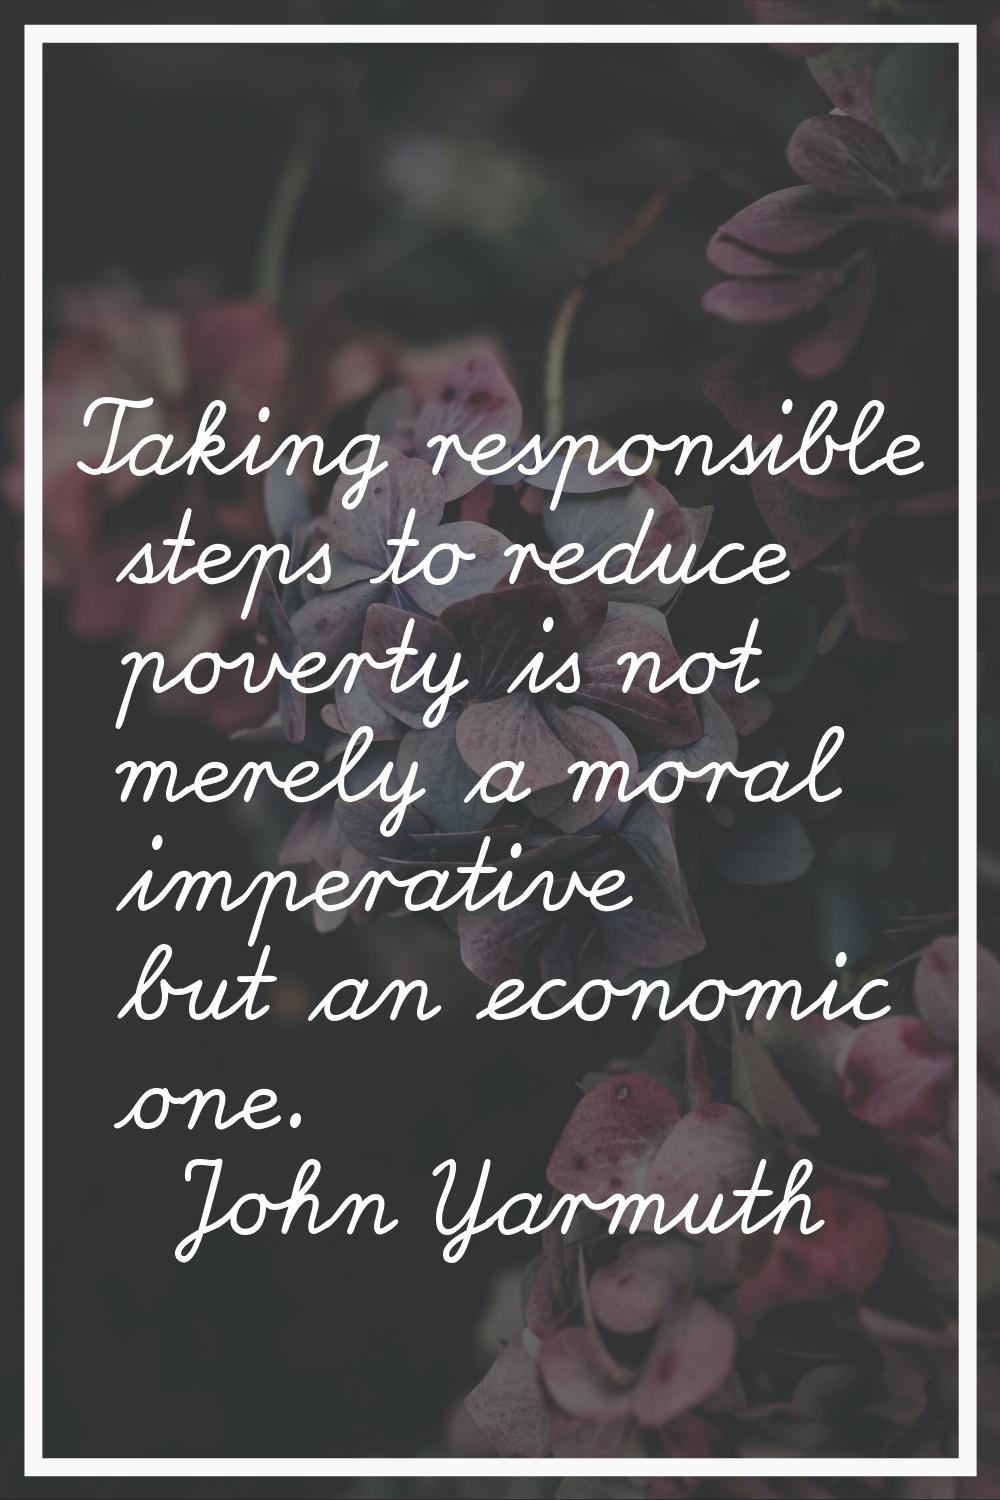 Taking responsible steps to reduce poverty is not merely a moral imperative but an economic one.